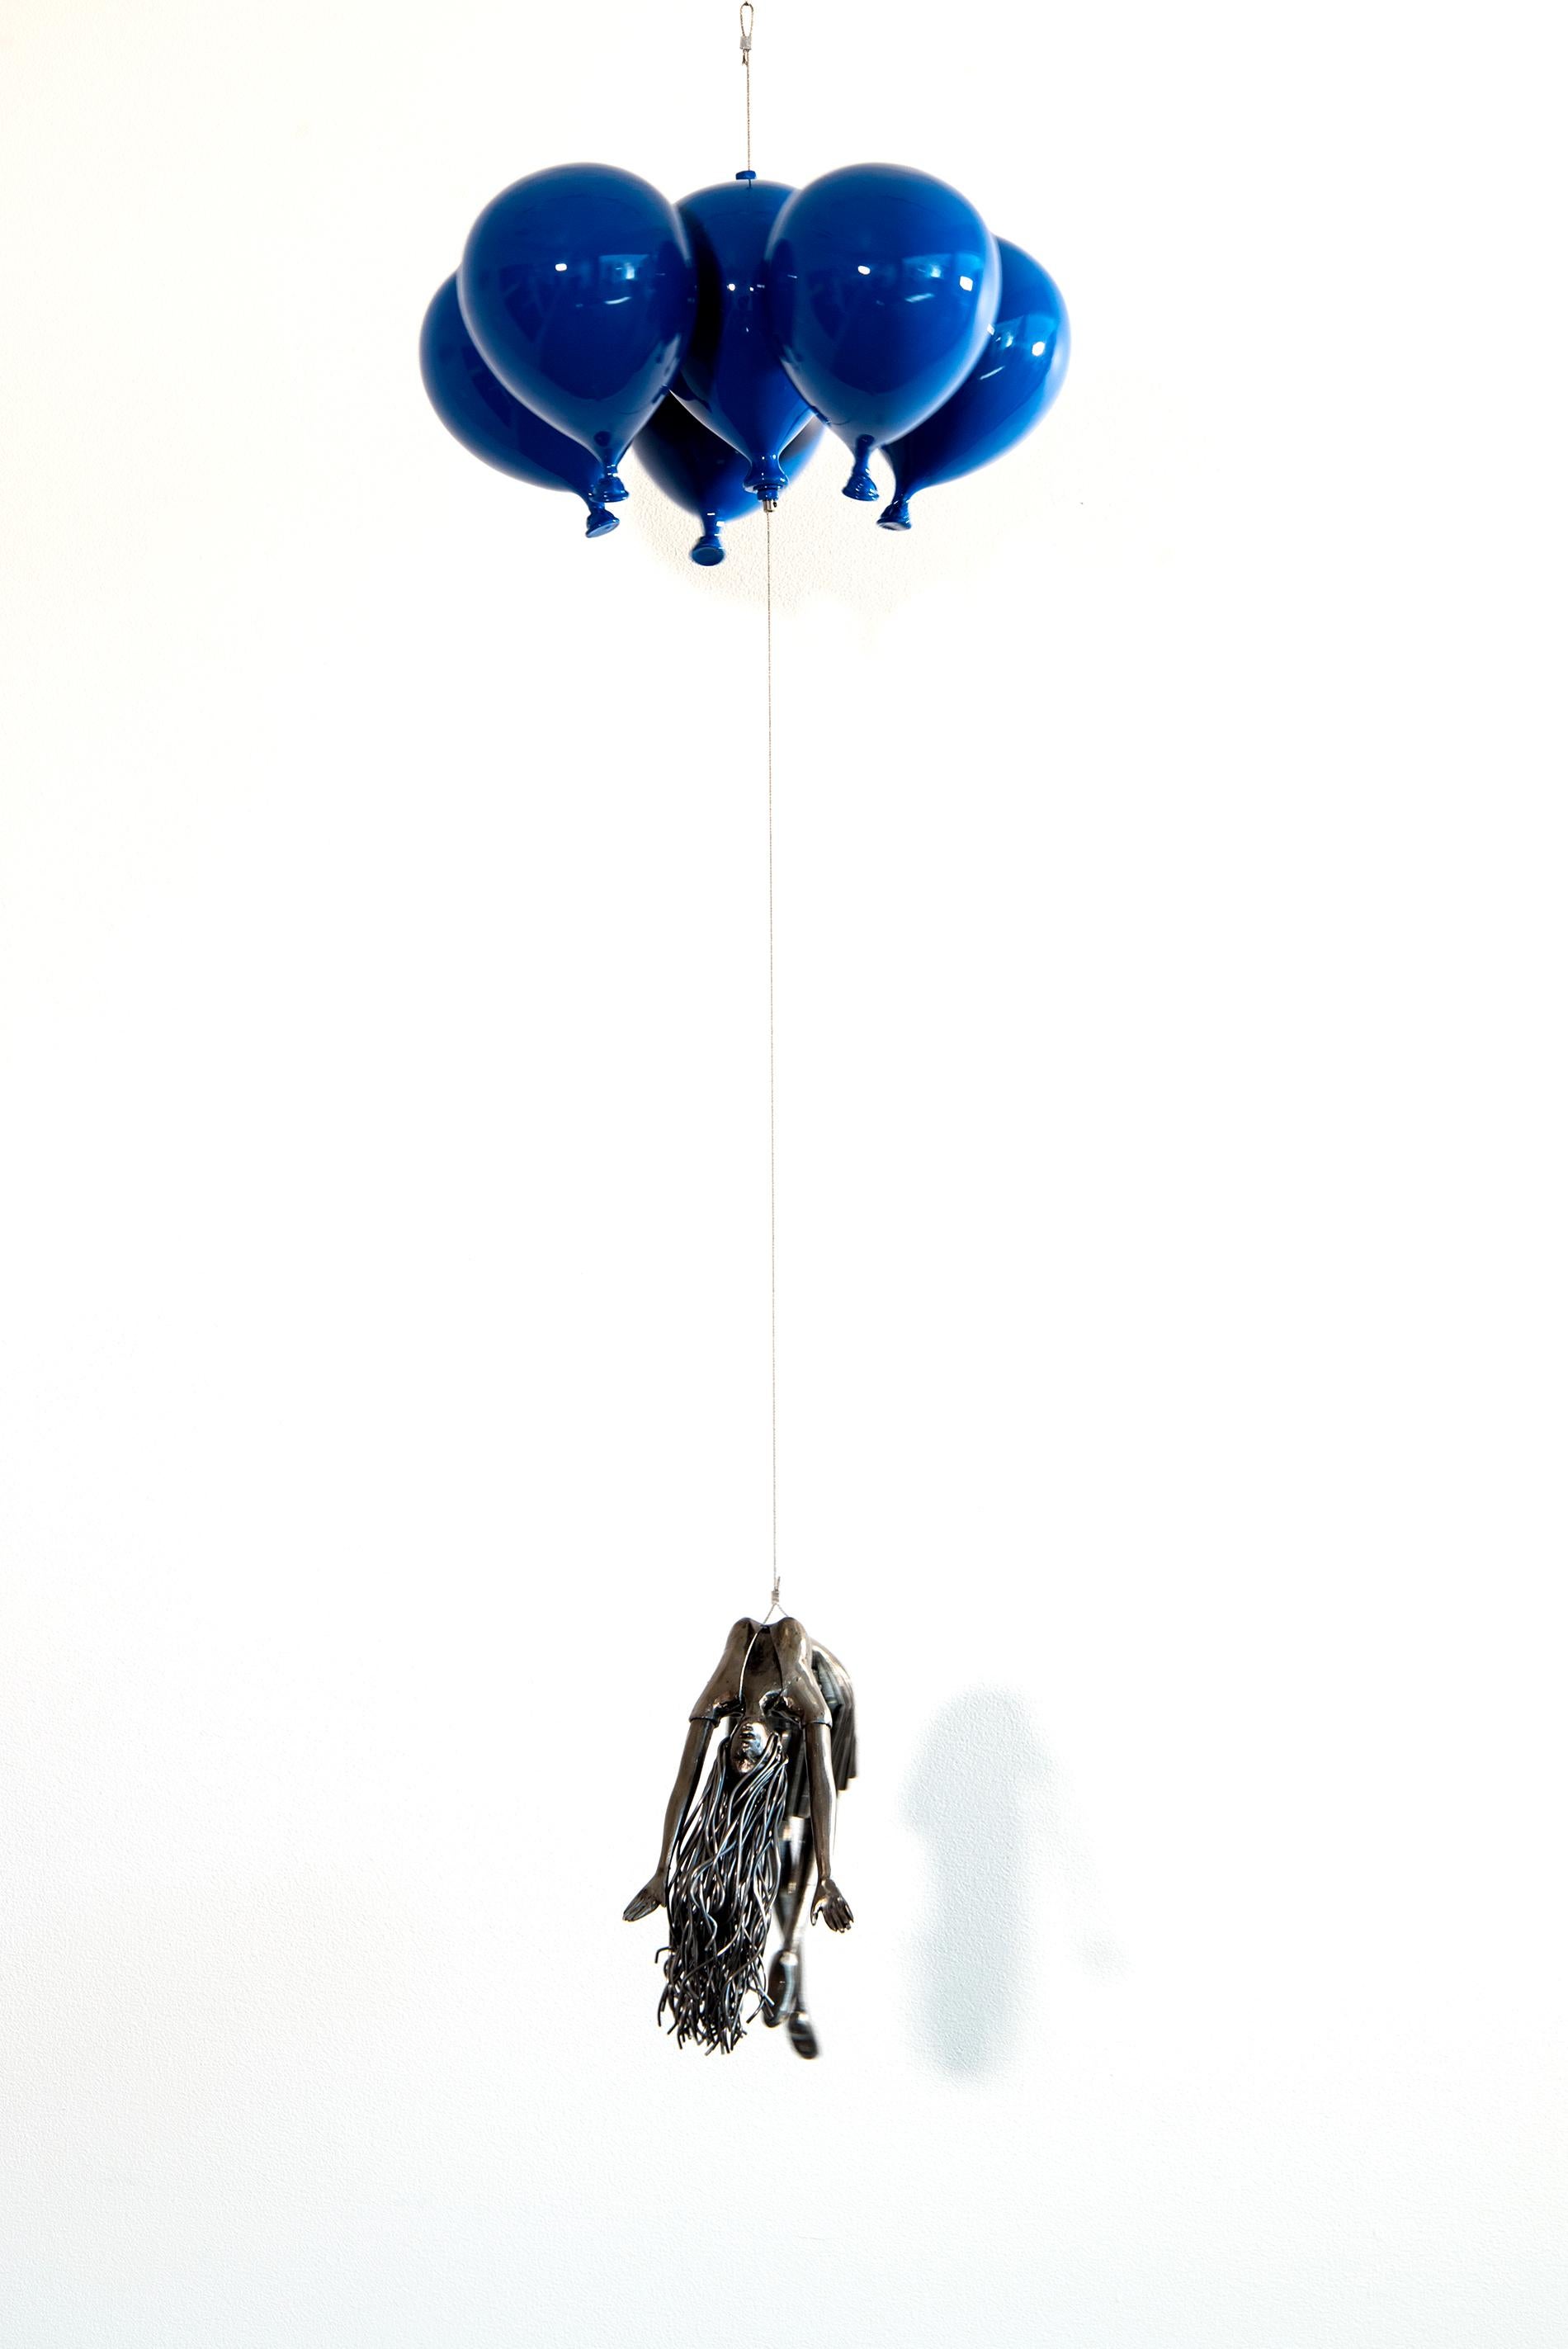 Blue is My Colour - woman, steel, colourful, blue, balloons, suspended sculpture - Contemporary Mixed Media Art by Derya Ozparlak